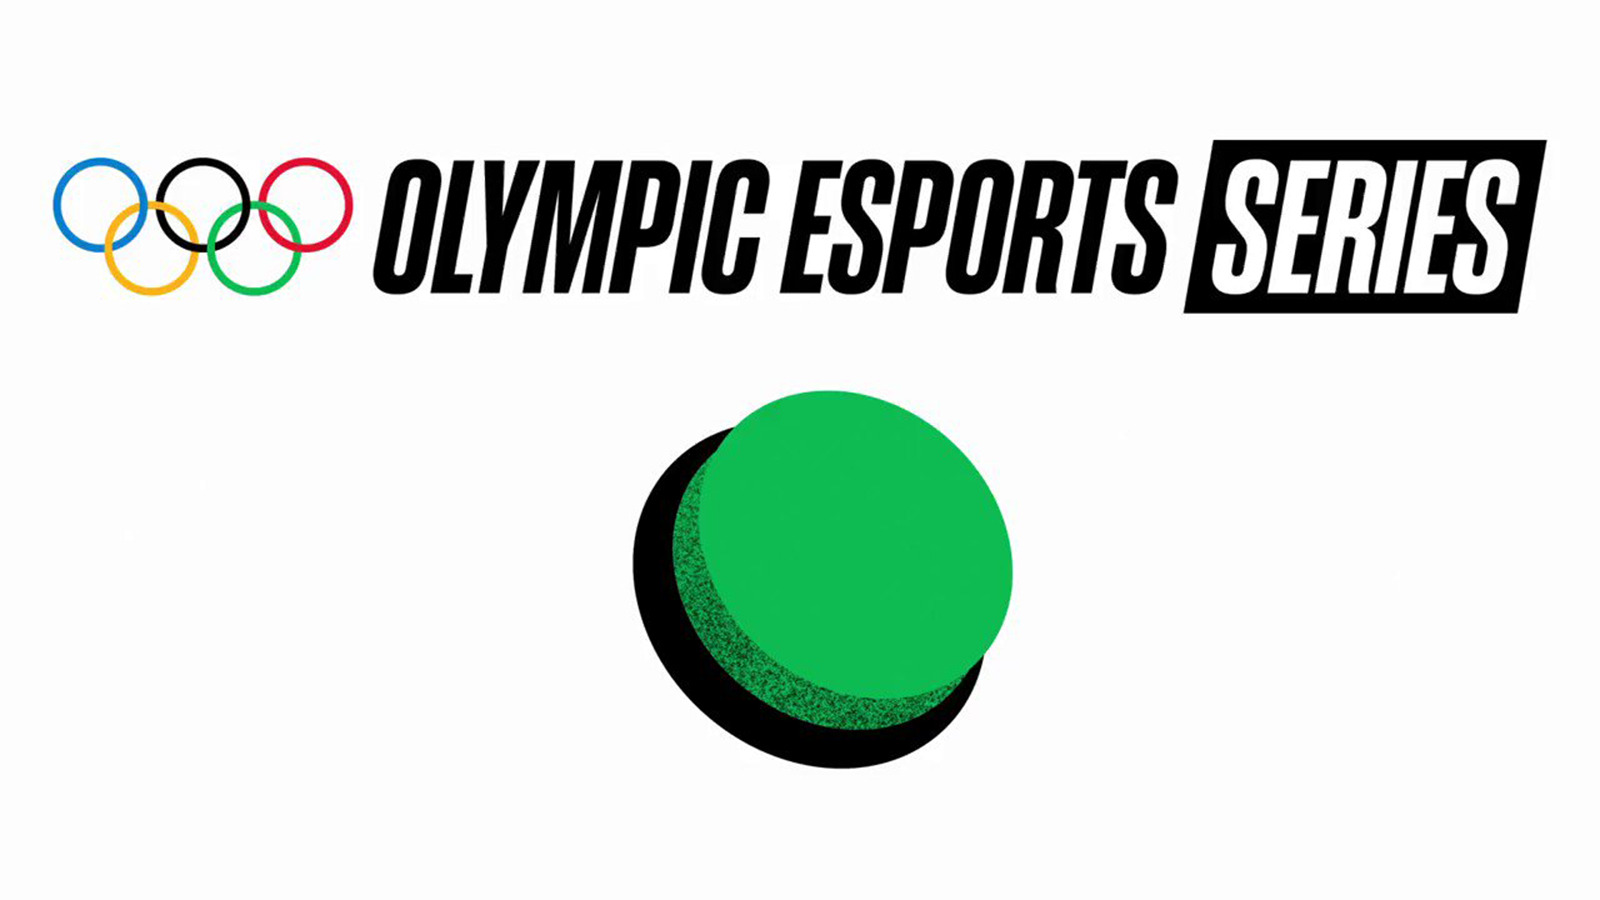 Olympic Esports Series: Fortnite Takes Aim at the International Sporting Stage